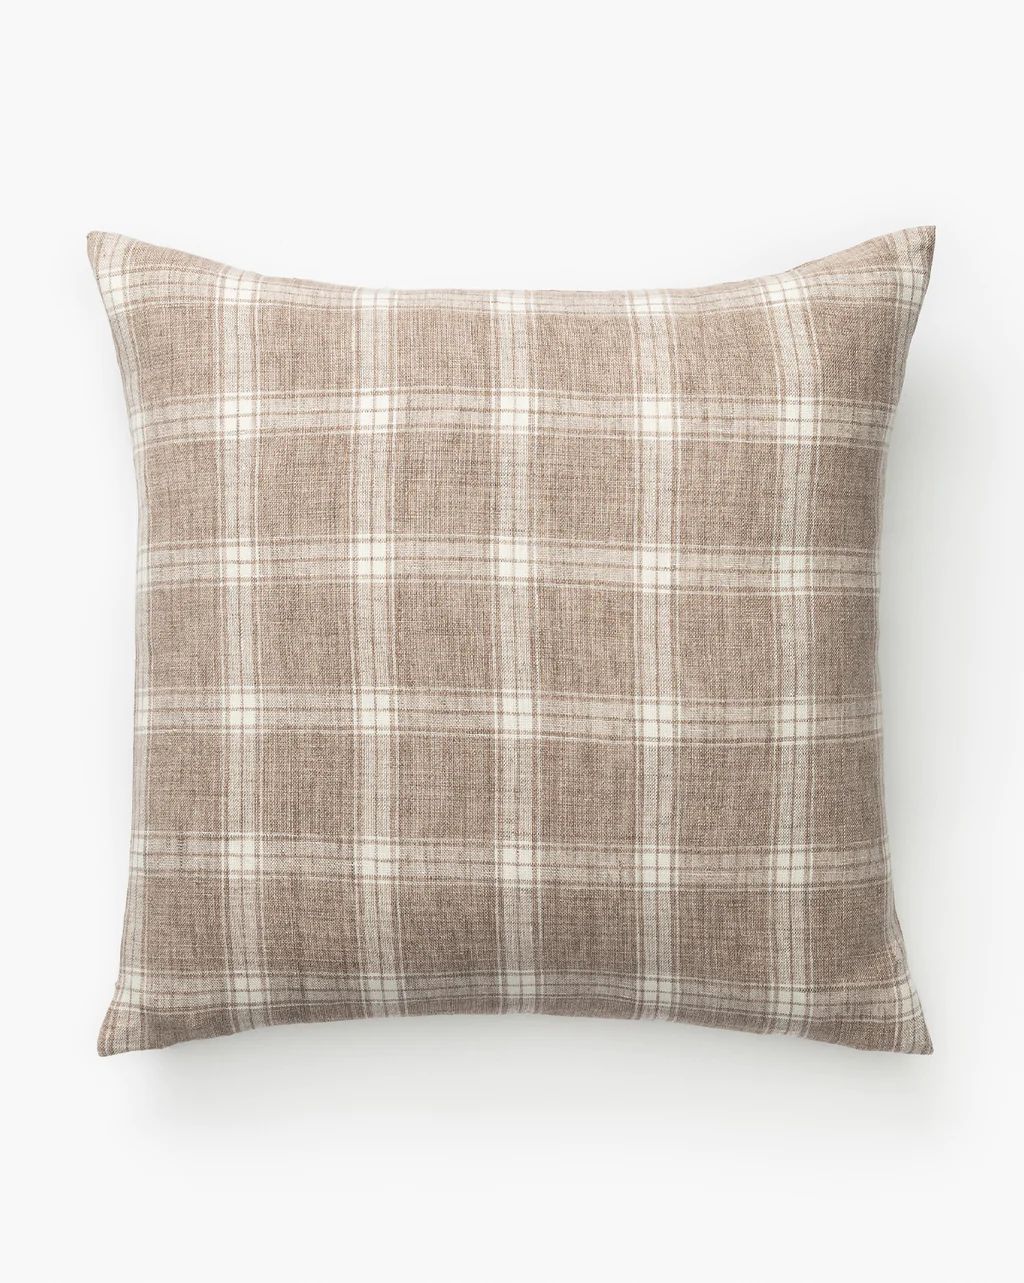 Tannehill Pillow Cover | McGee & Co.